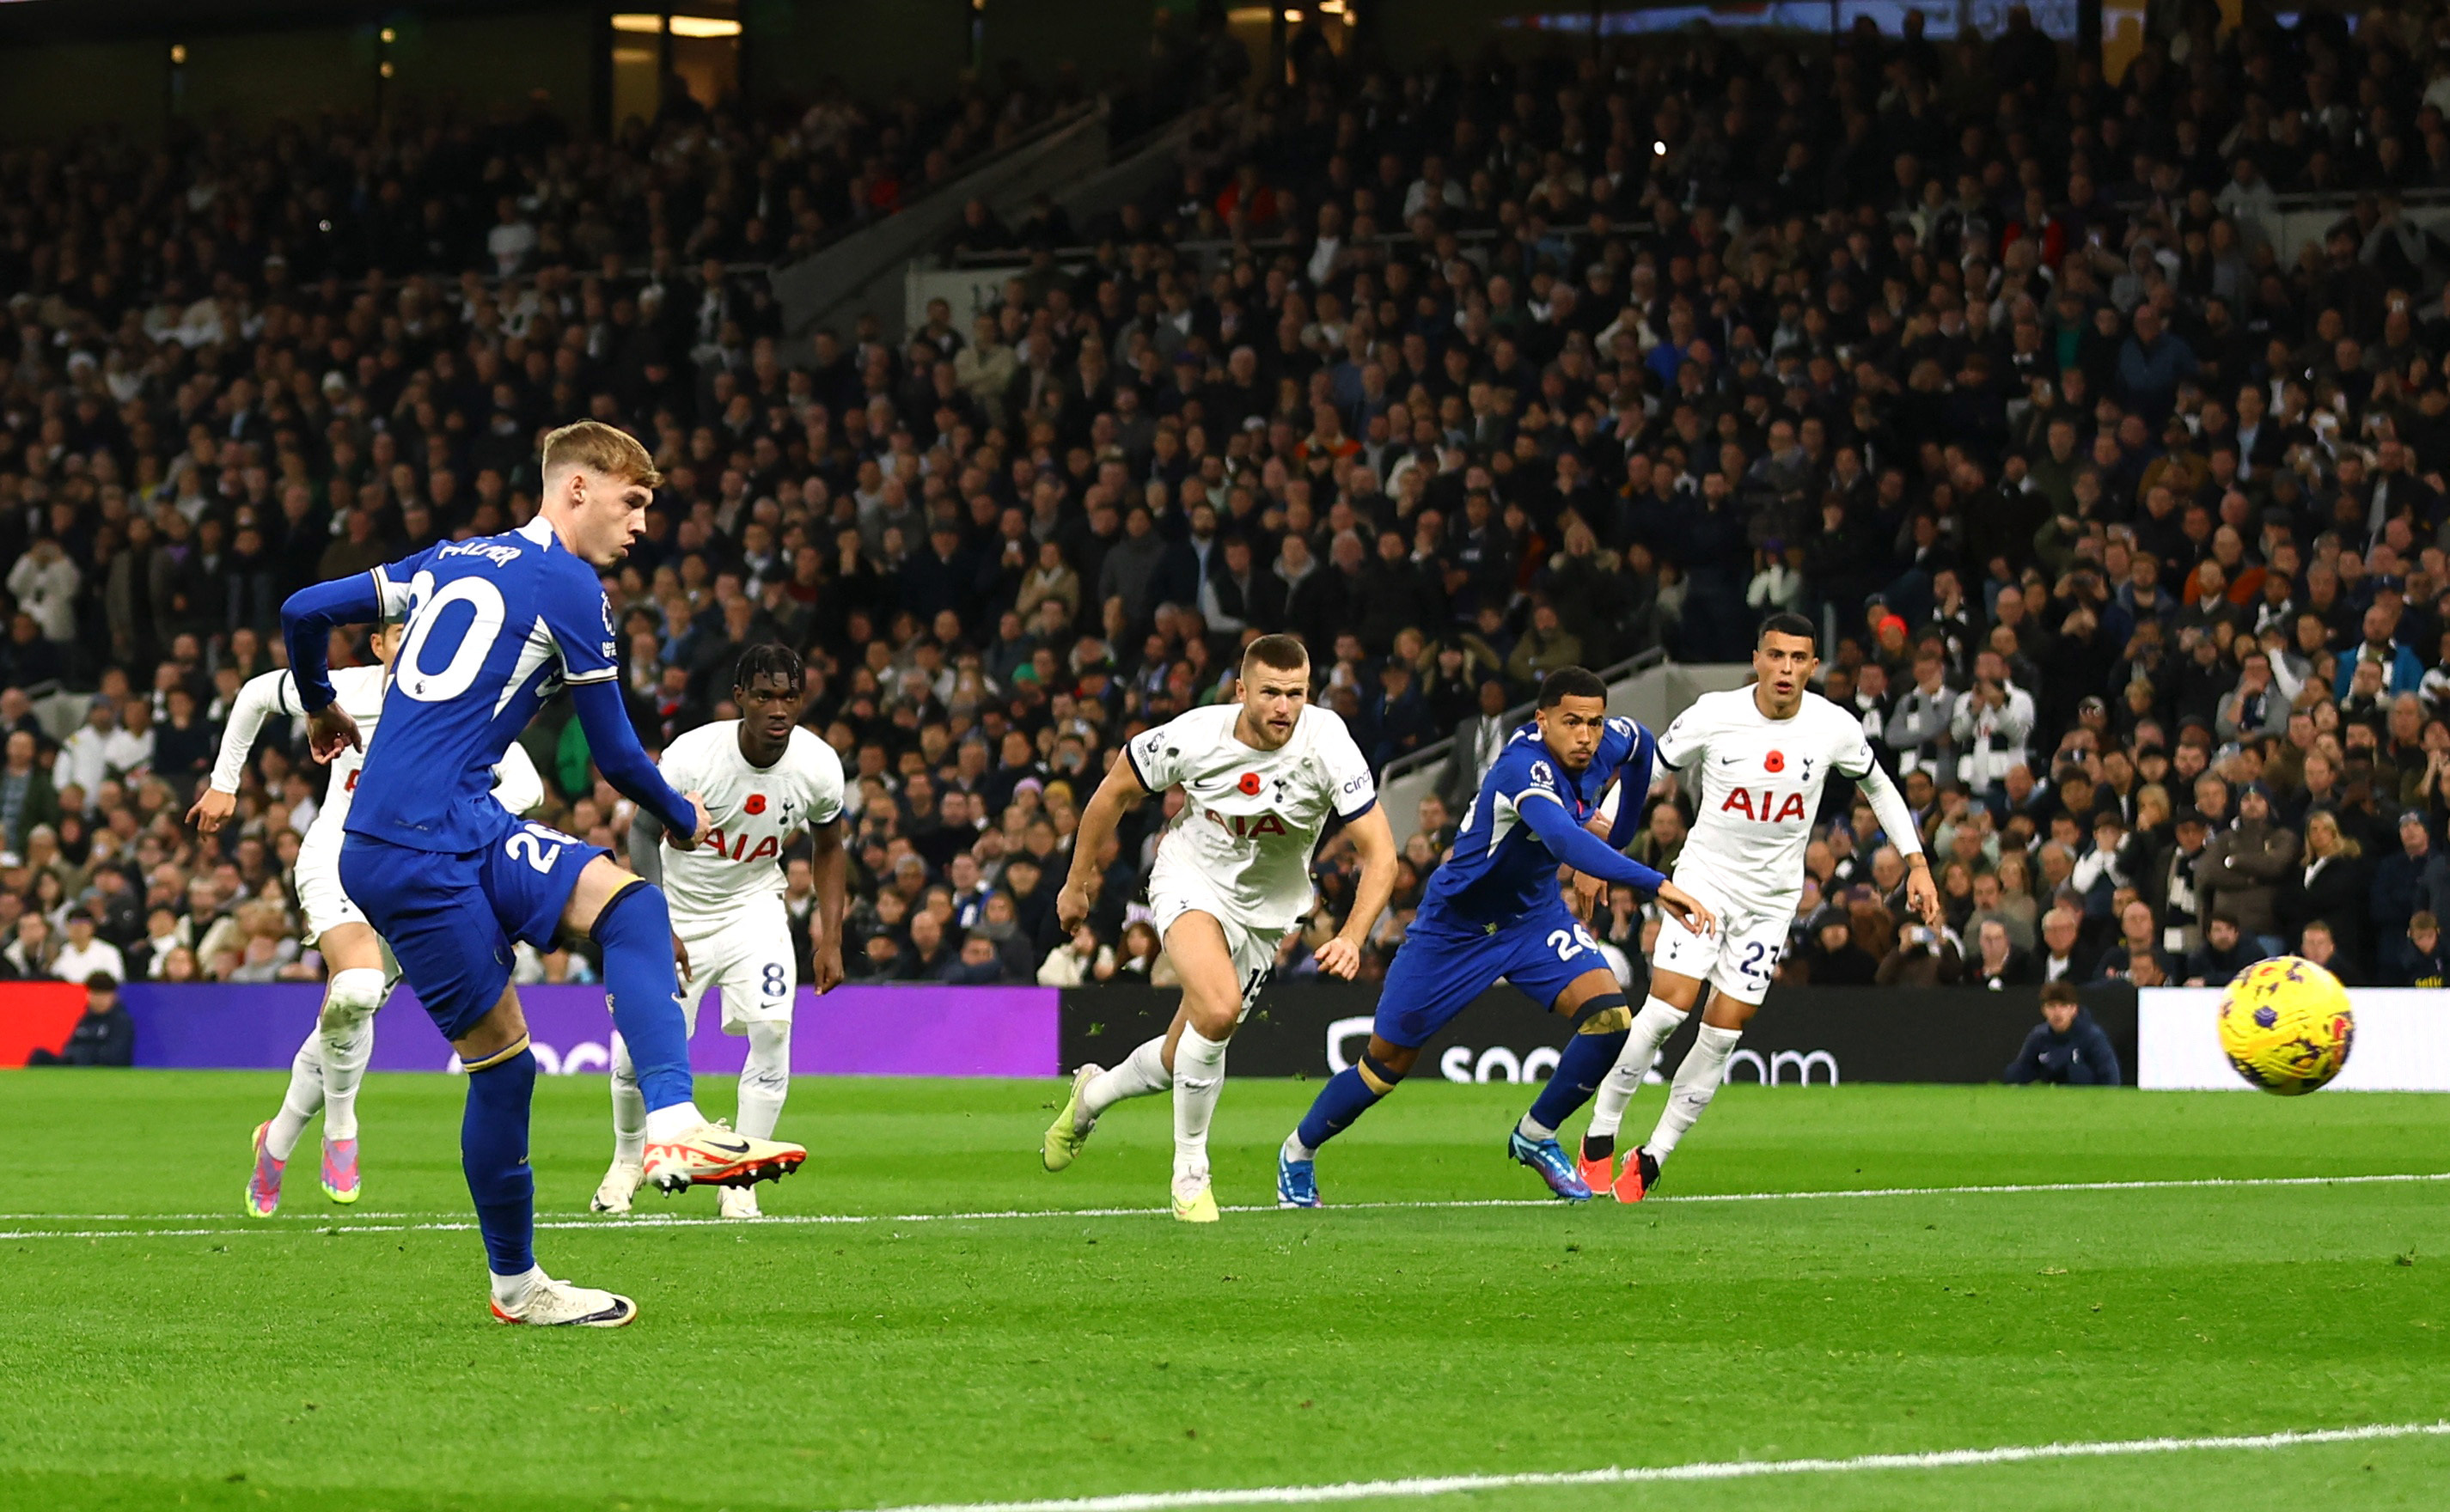 9-man Tottenham beaten by Chelsea in chaotic match and loses EPL's